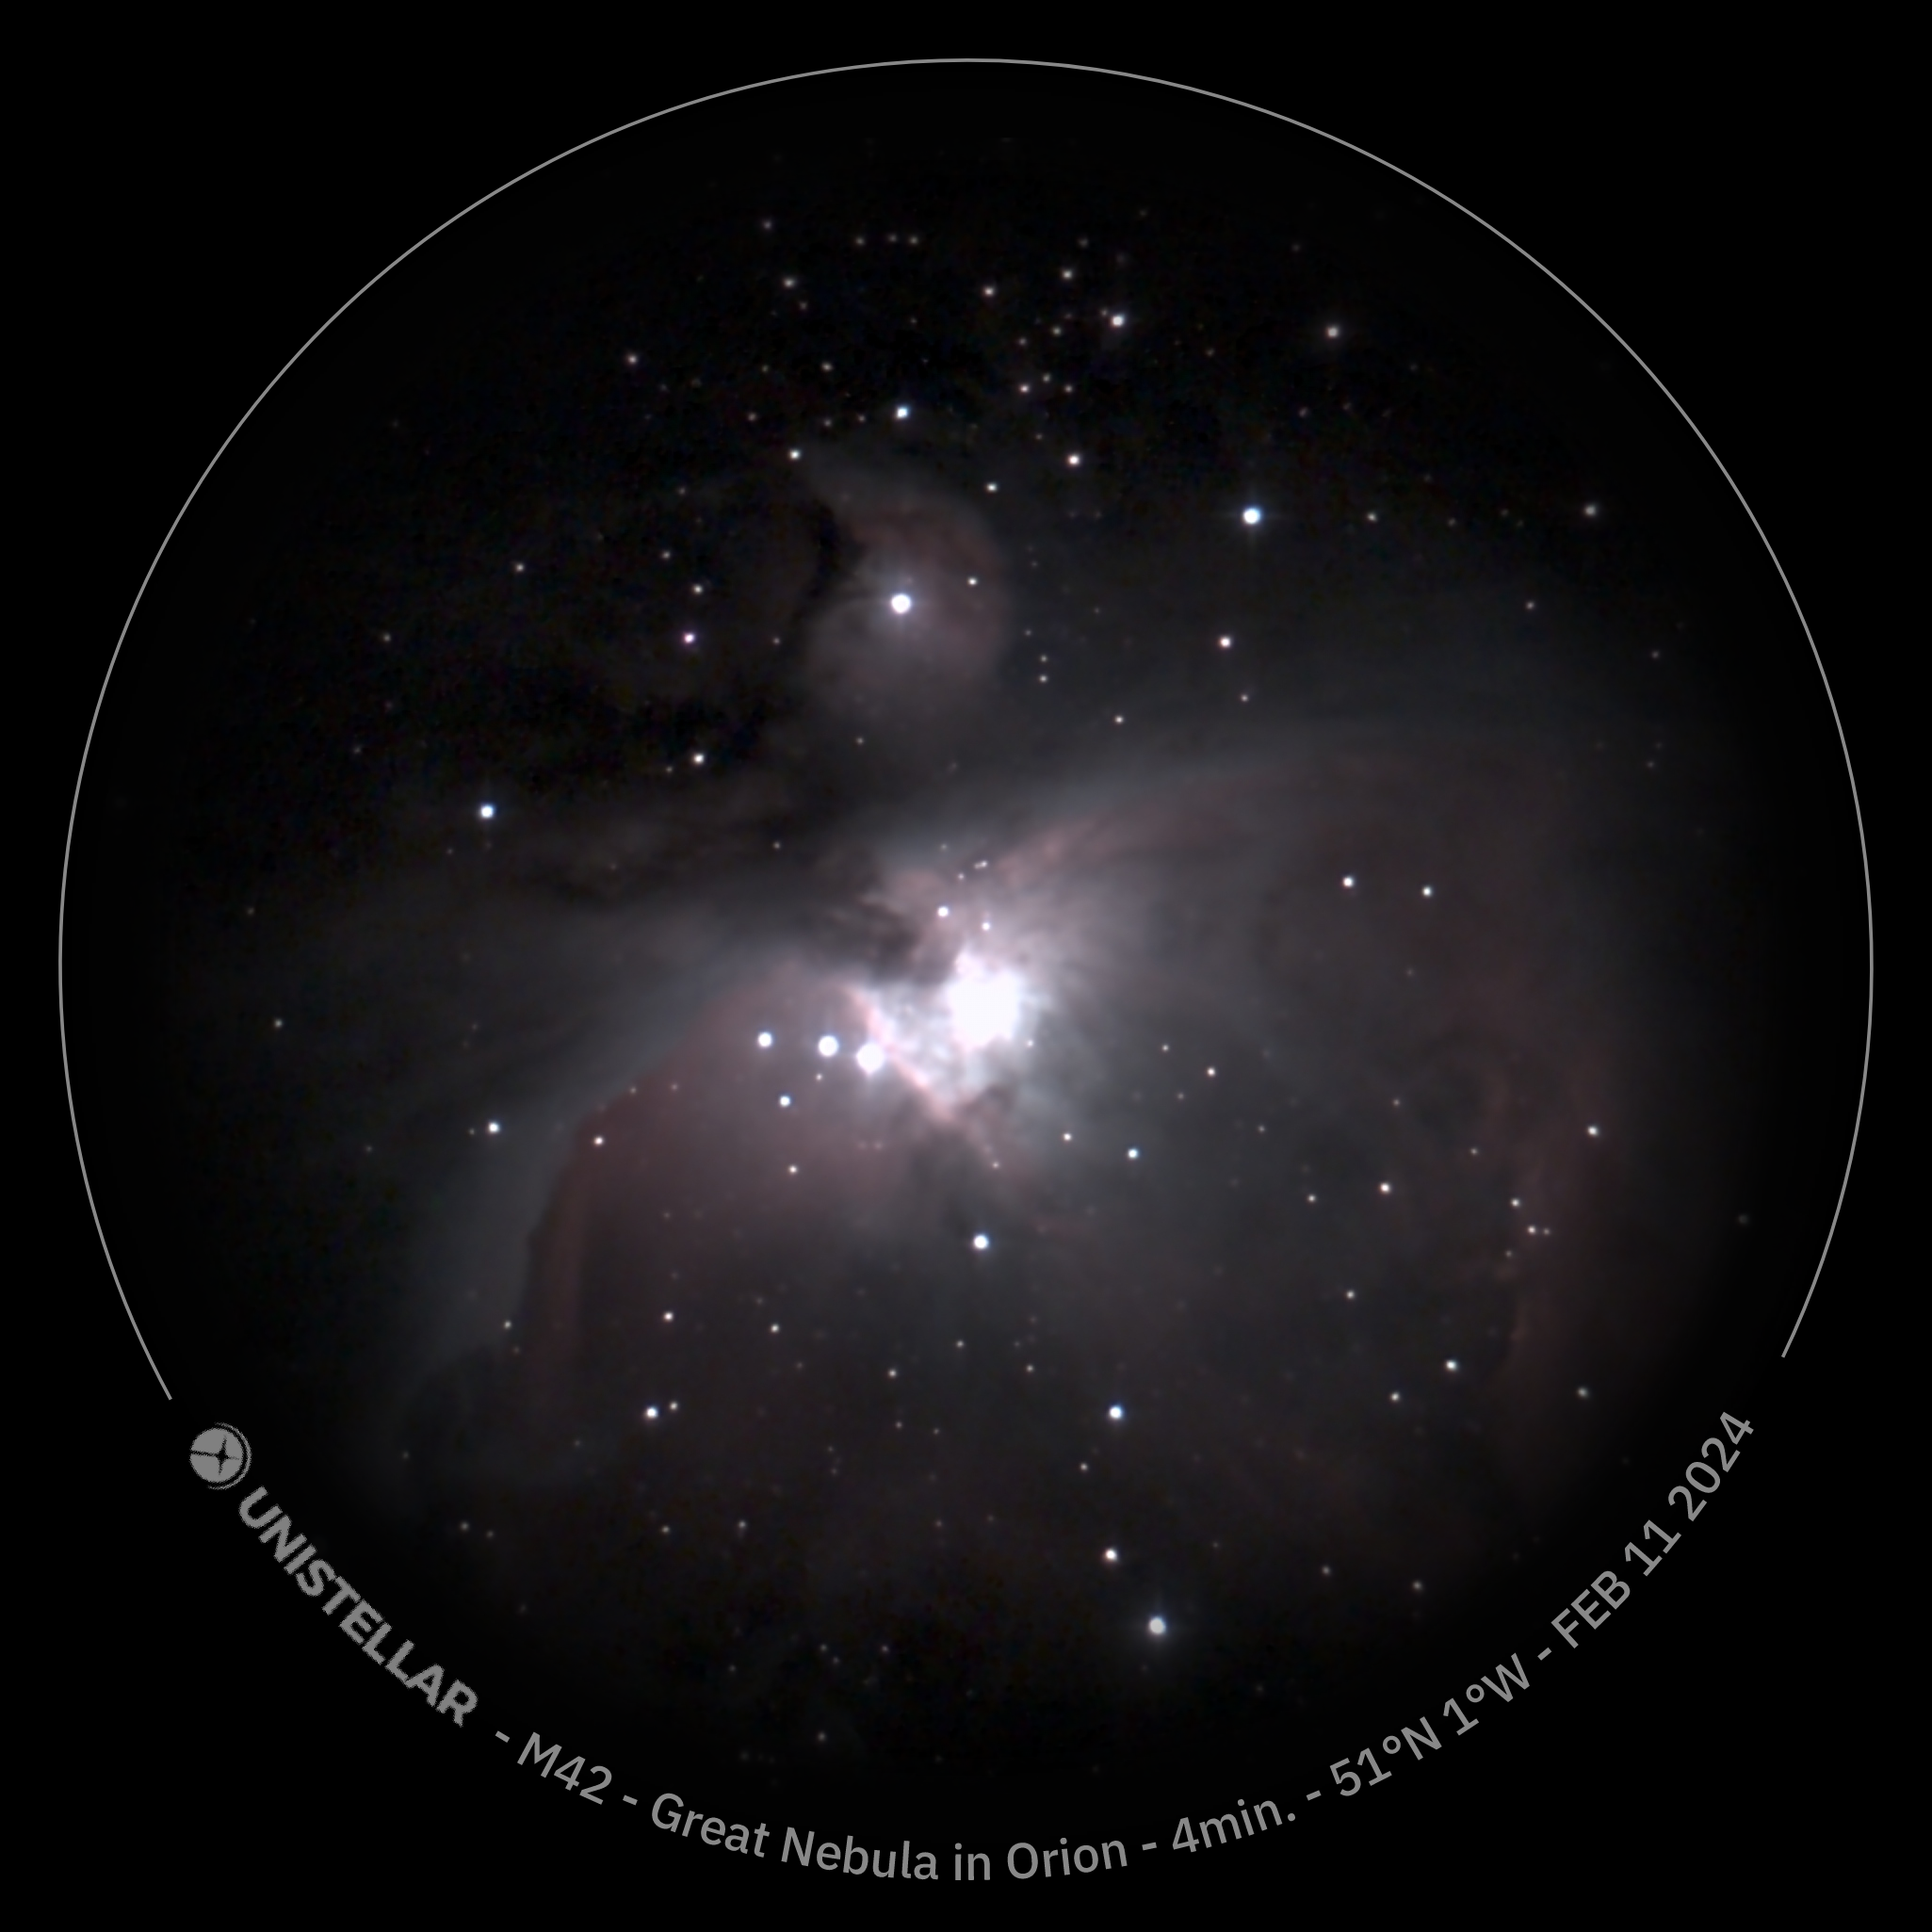 M42 Great nebula in Orion taken with the Unistellar Odyssey Pro